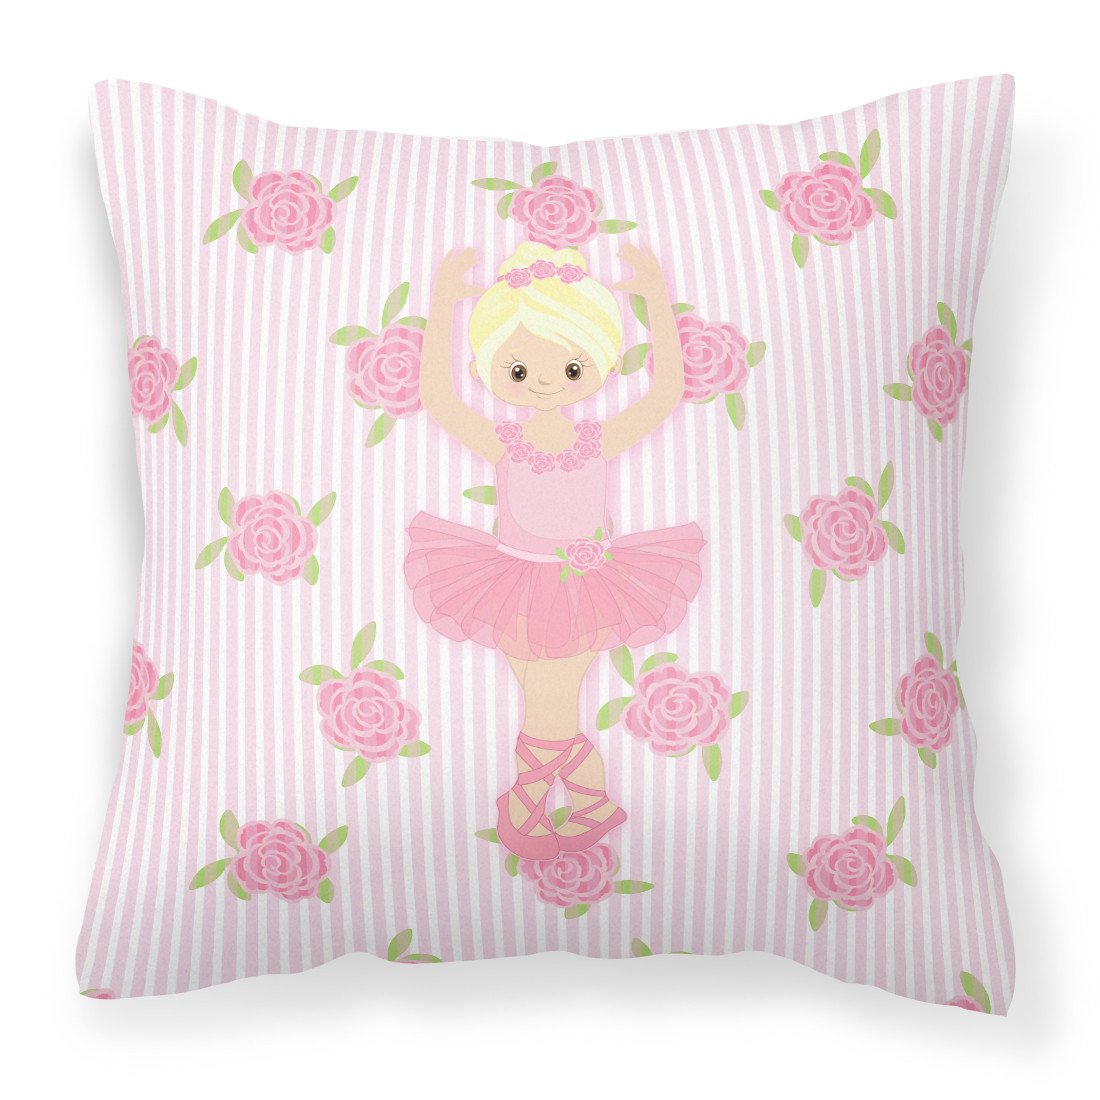 Ballerina Blonde Front Pose Fabric Decorative Pillow BB5164PW1818 by Caroline's Treasures